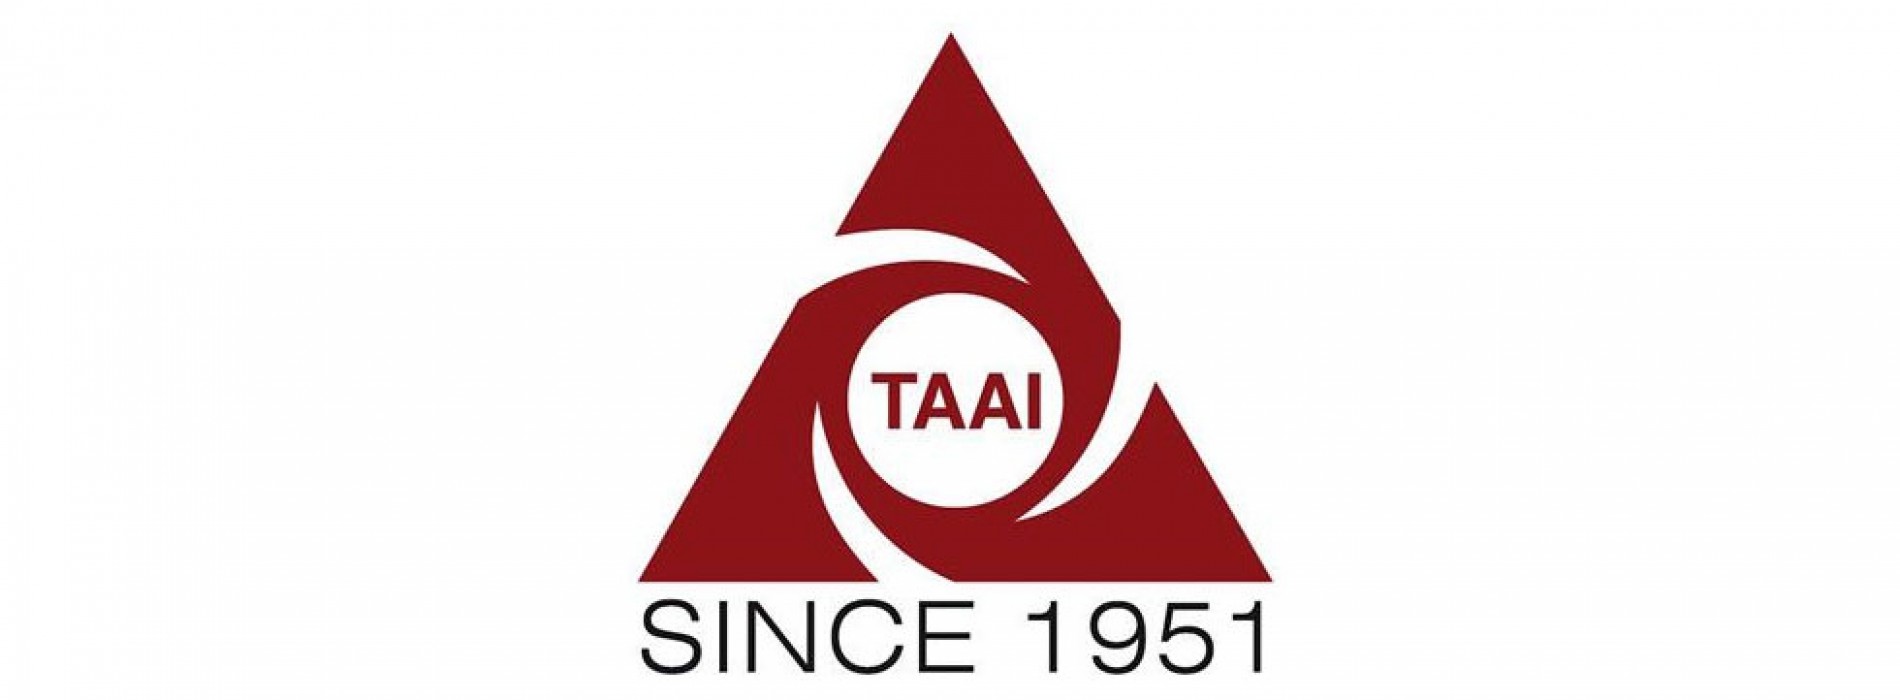 TAAI convention to be held at Abu Dhabi